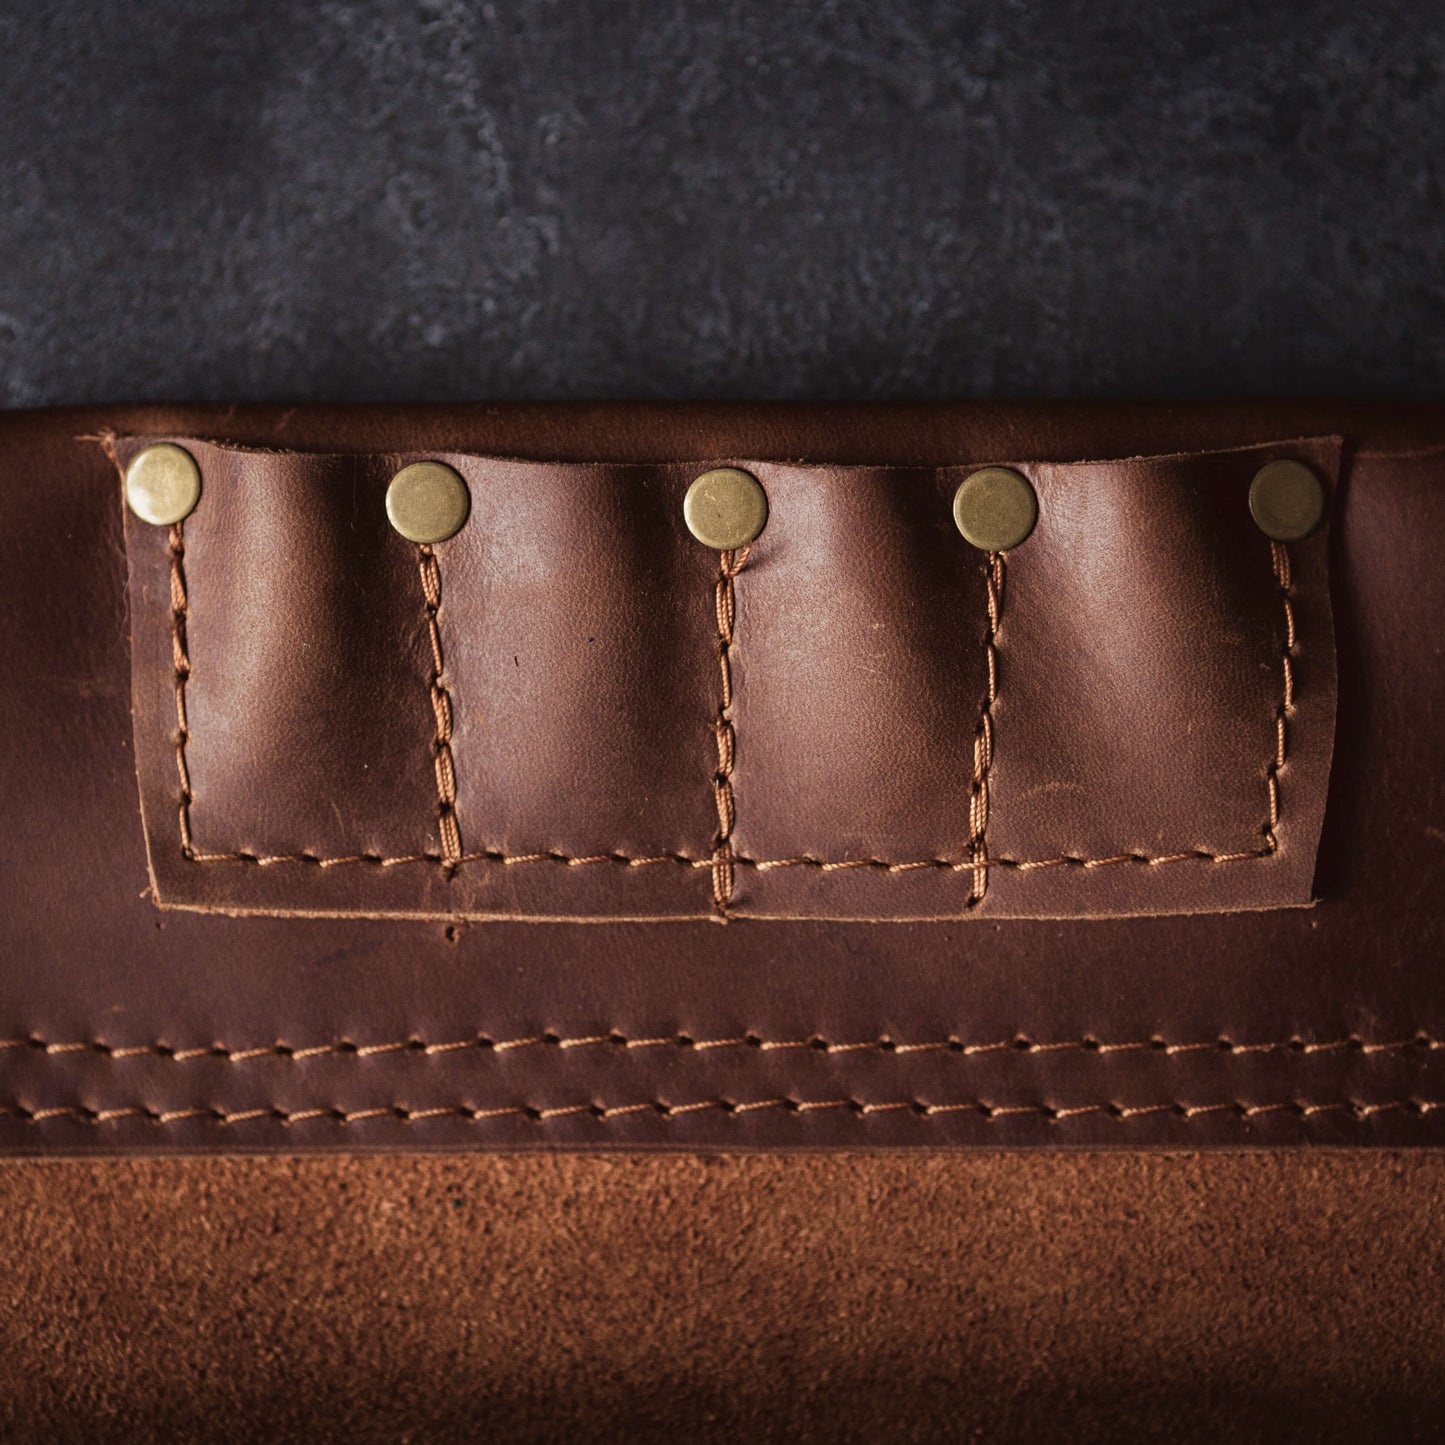 Close-up of a brown leather Belt Bag 1 by The Durham Leatherworker with detailed stitching and metal rivets. The texture highlights the craftsmanship and quality of the material.